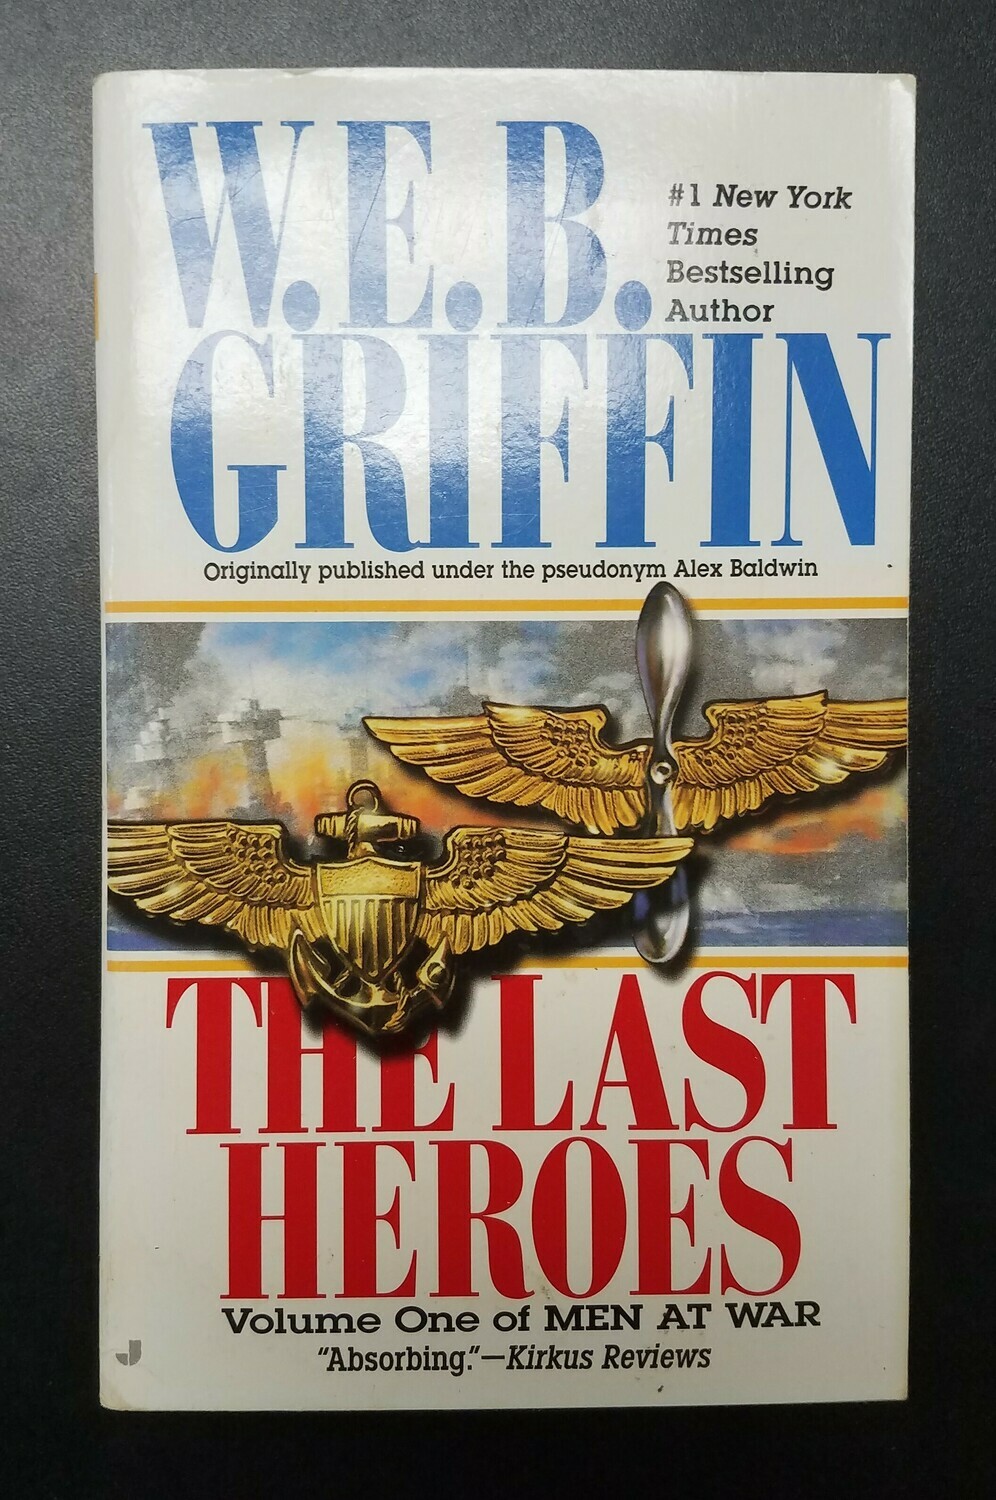 The Last Heroes - Vol. 1: Men at War by W.E.B. Griffin